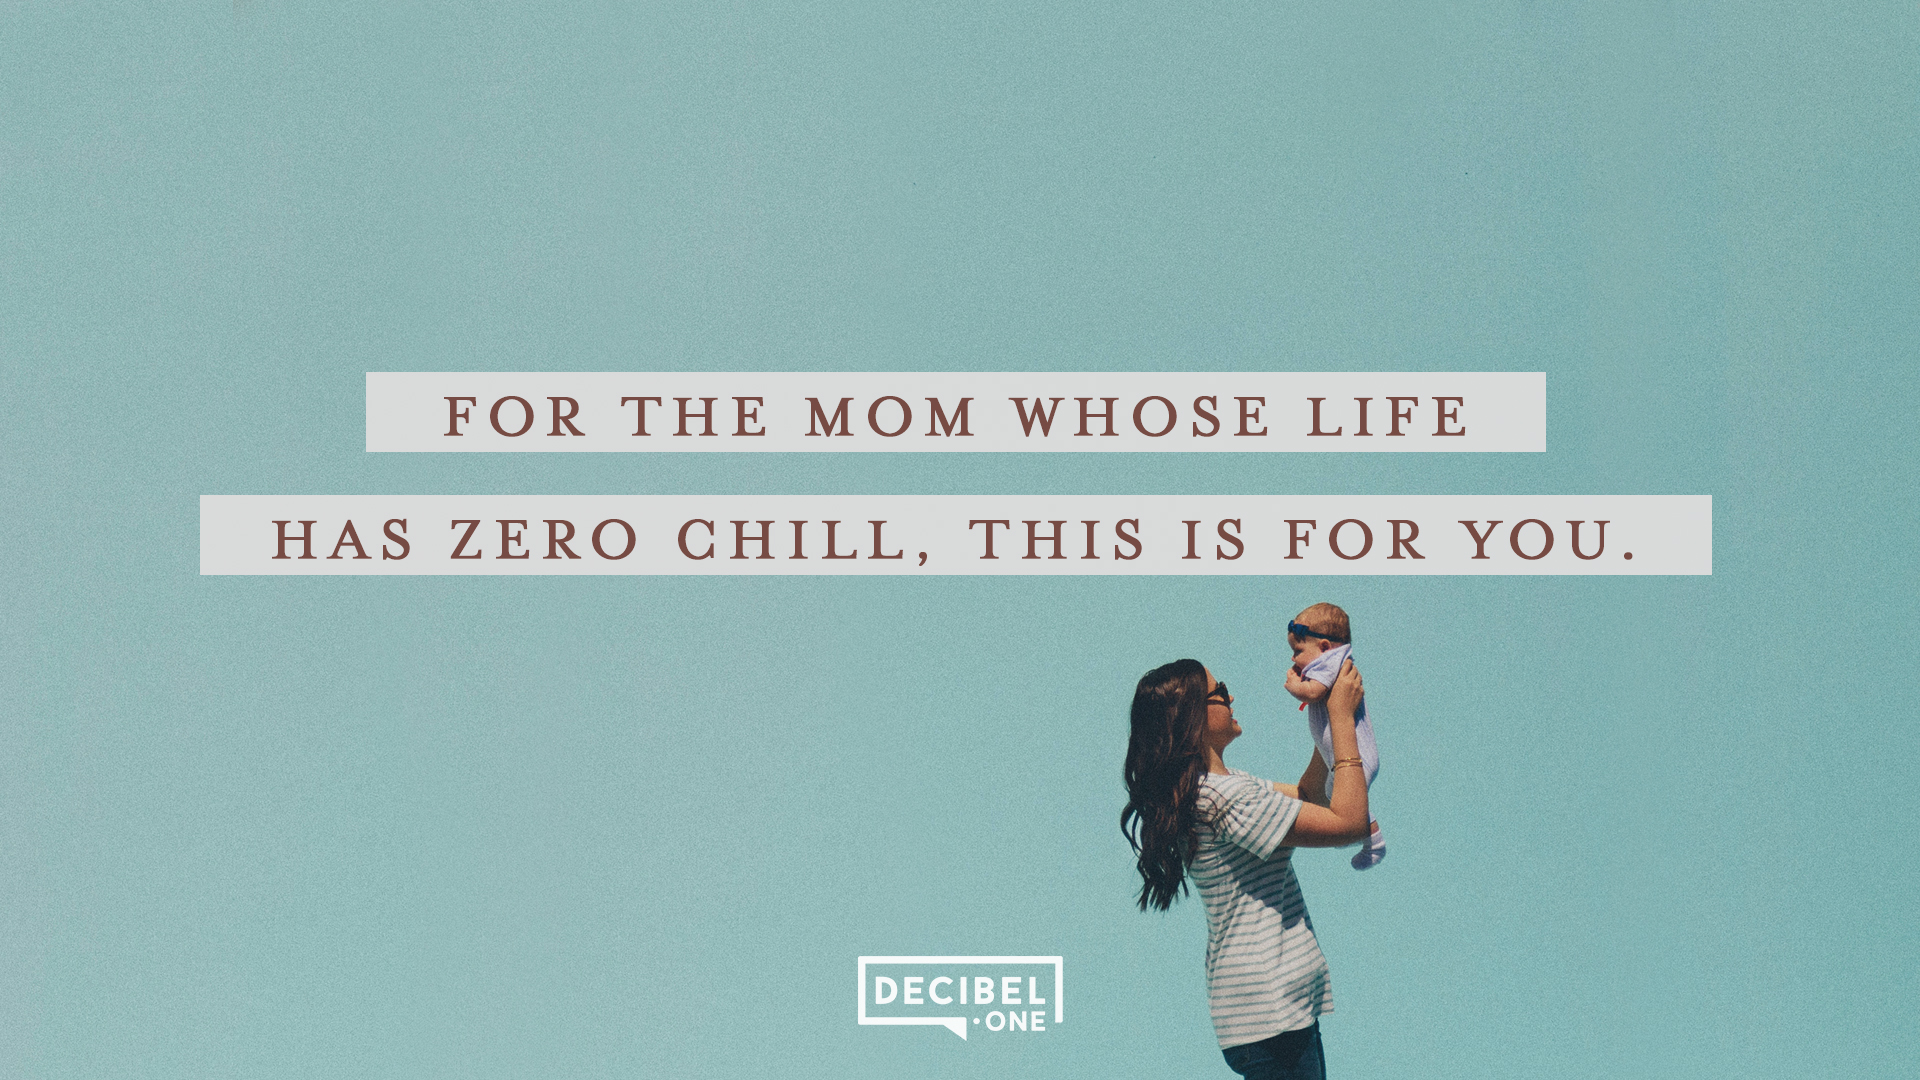 To the young mom whose life has zero chill, this is for you.